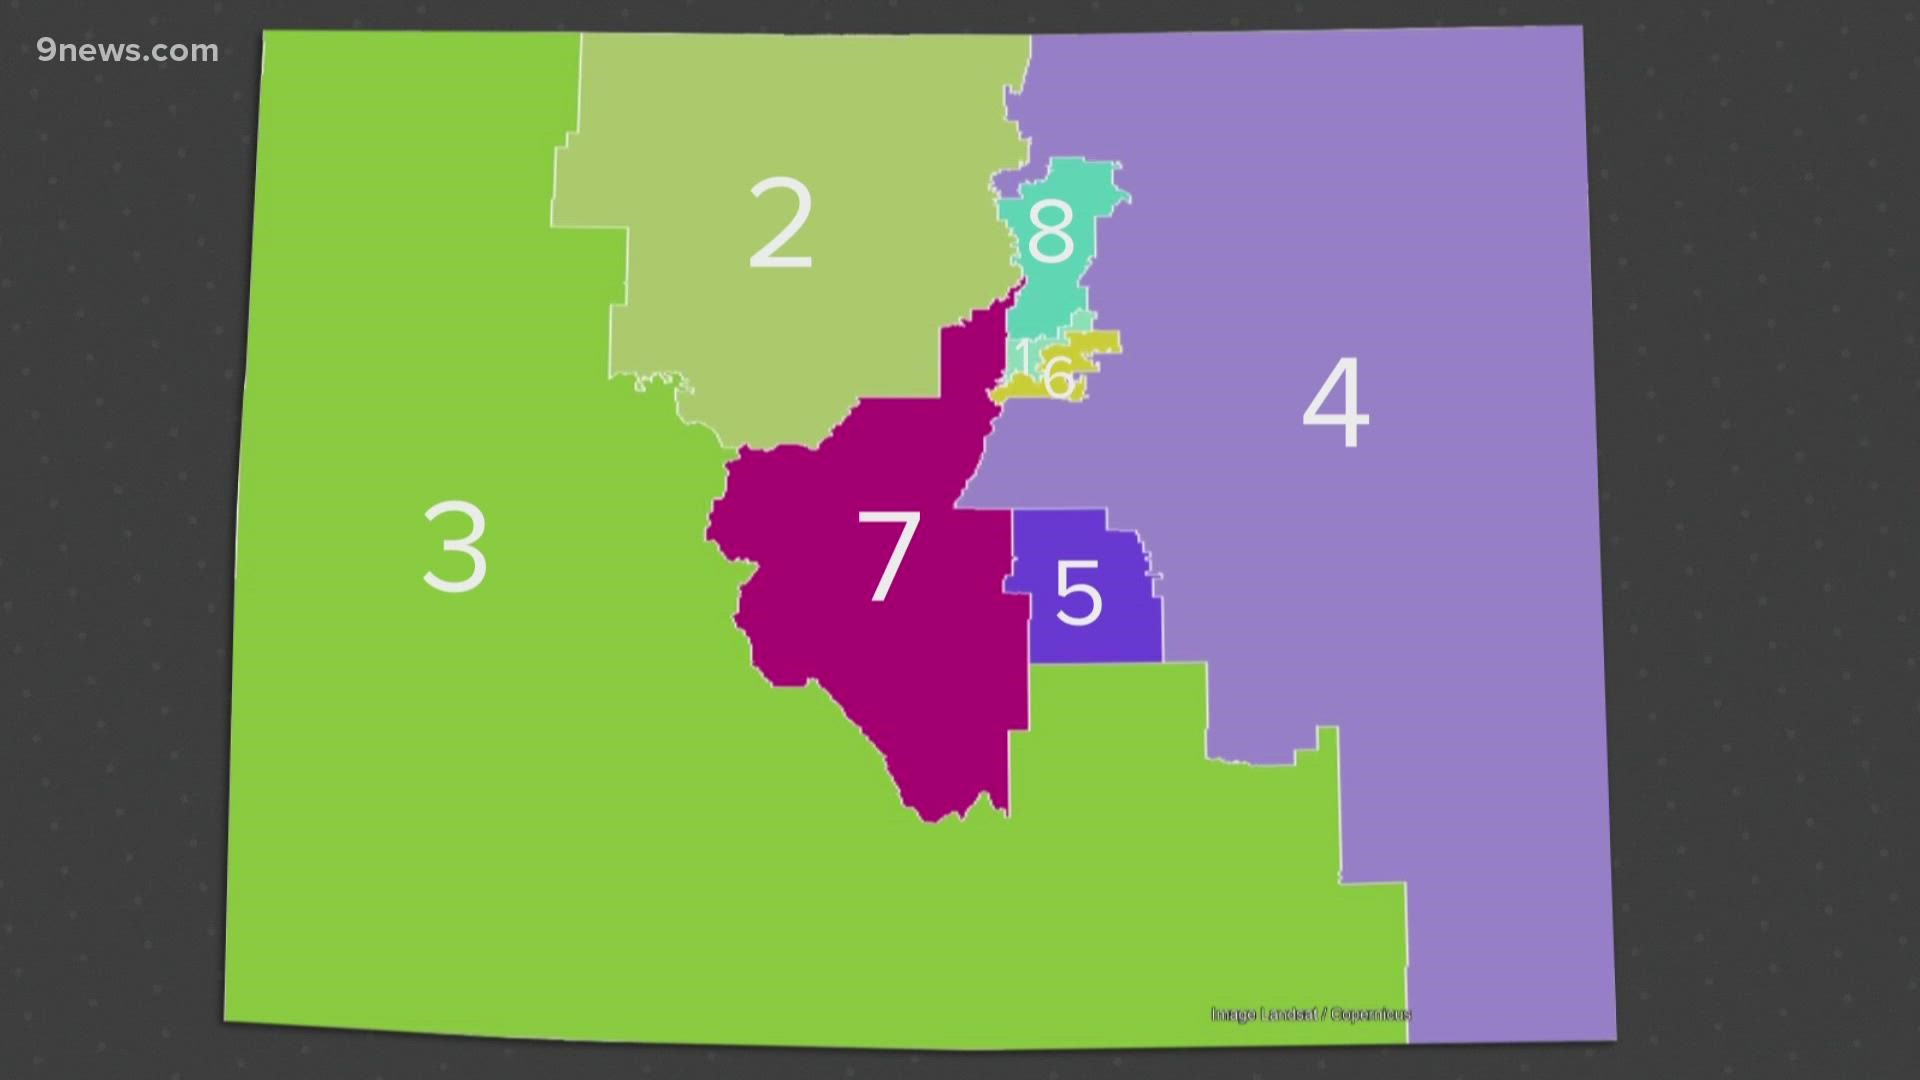 The commission selected a map that gives Republicans a chance to win half the seats Colorado sends to Congress.